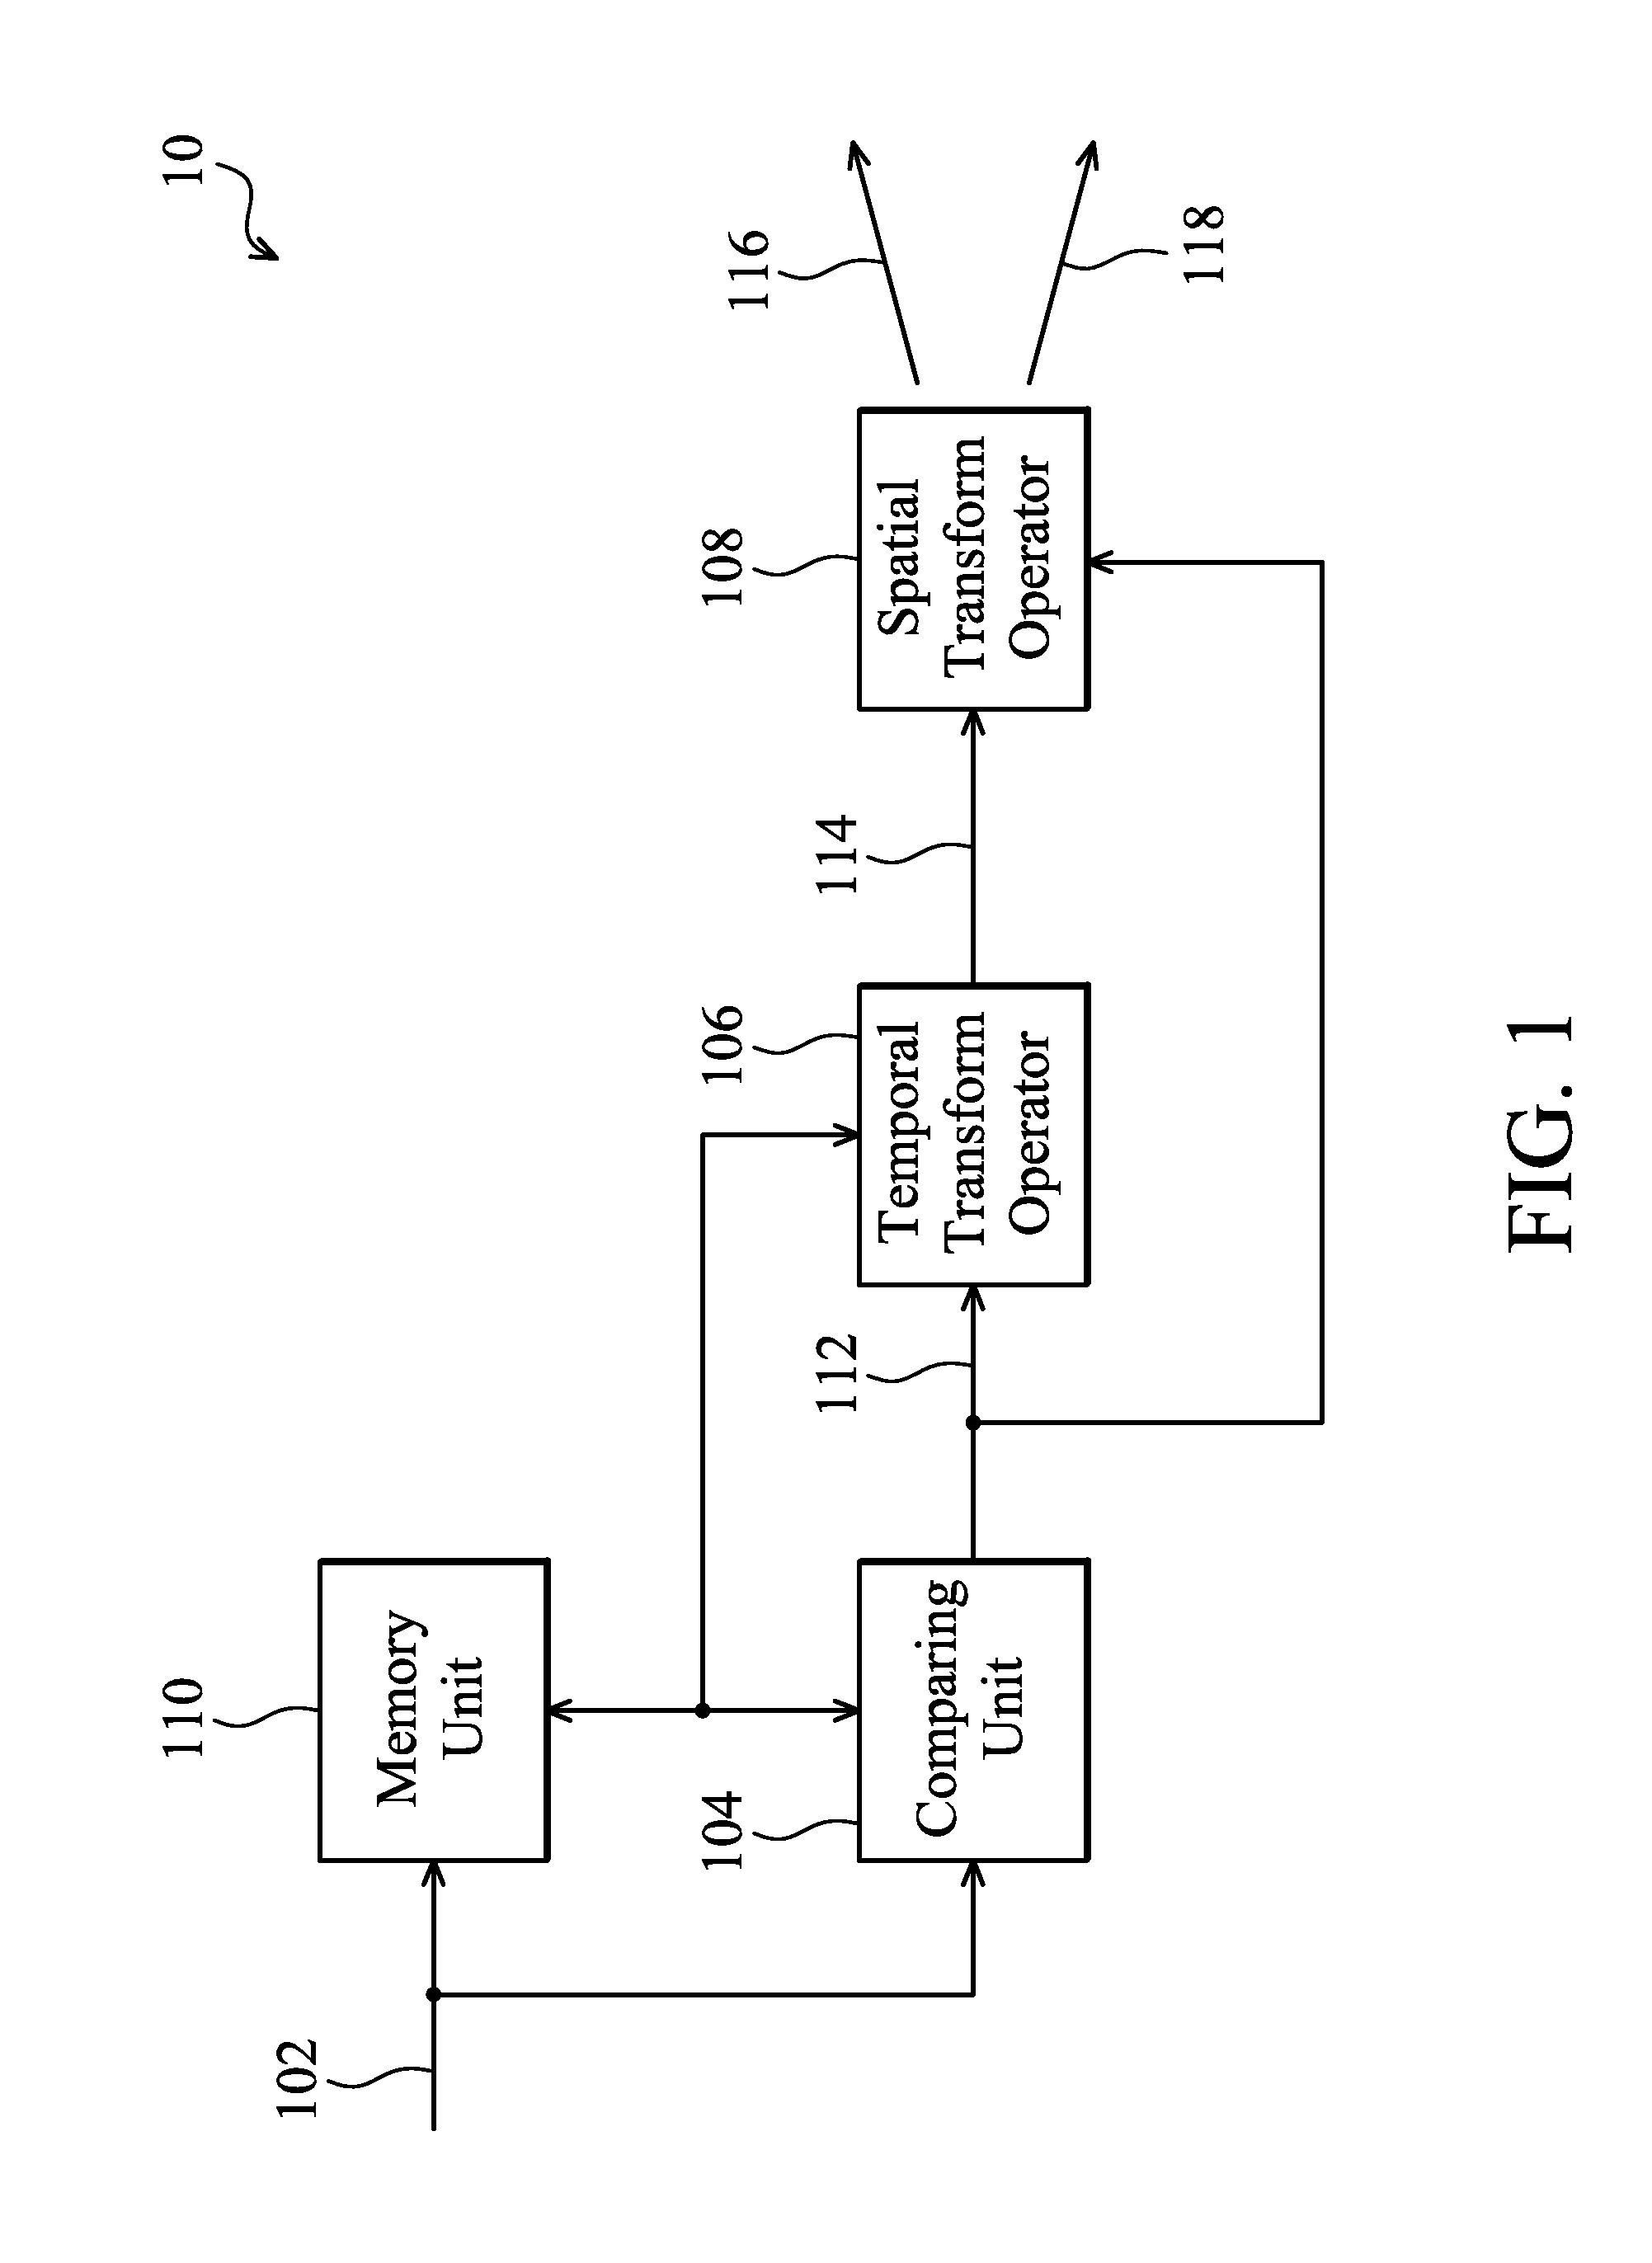 Apparatus and method for converting two-dimensional video frames to stereoscopic video frames